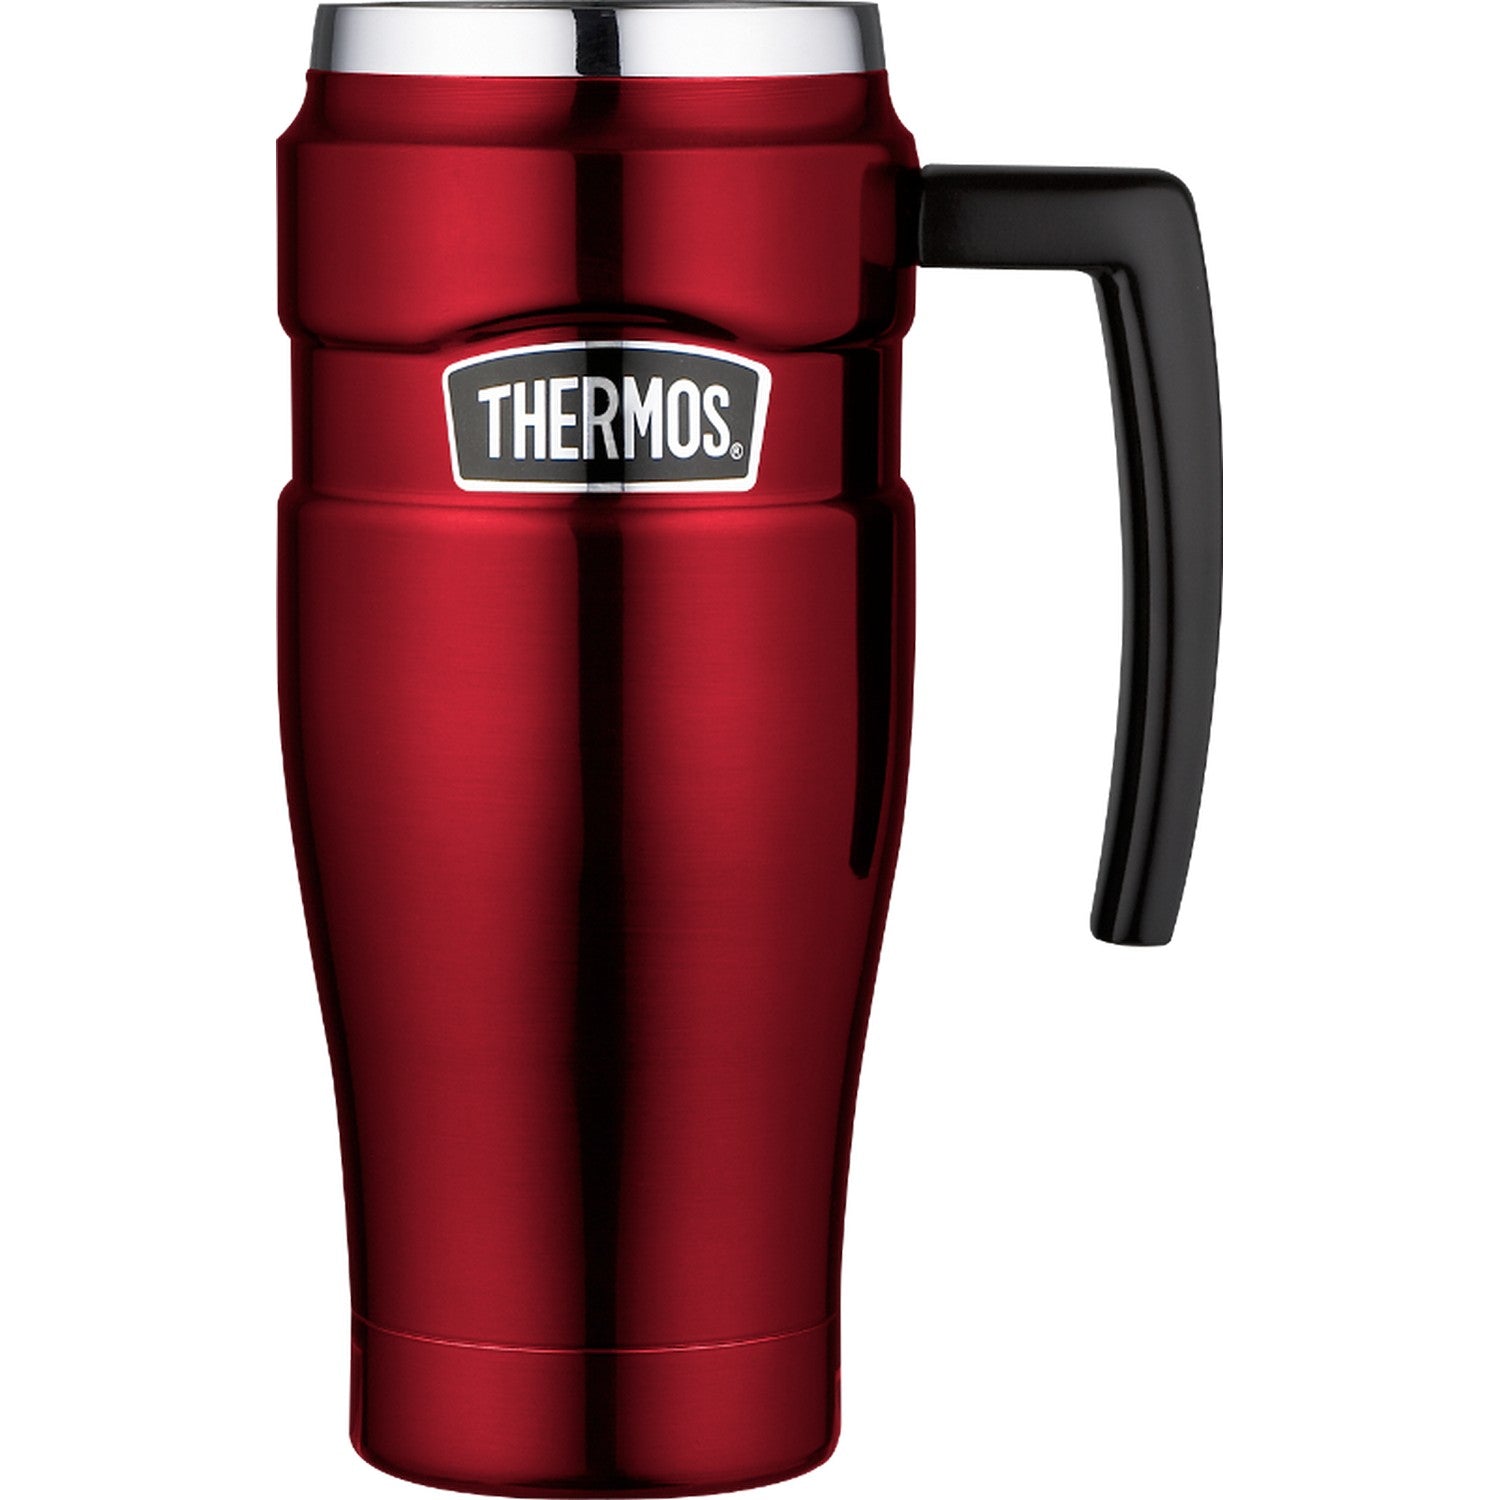 Thermos 470ml Red Vacuum Flask with Handle